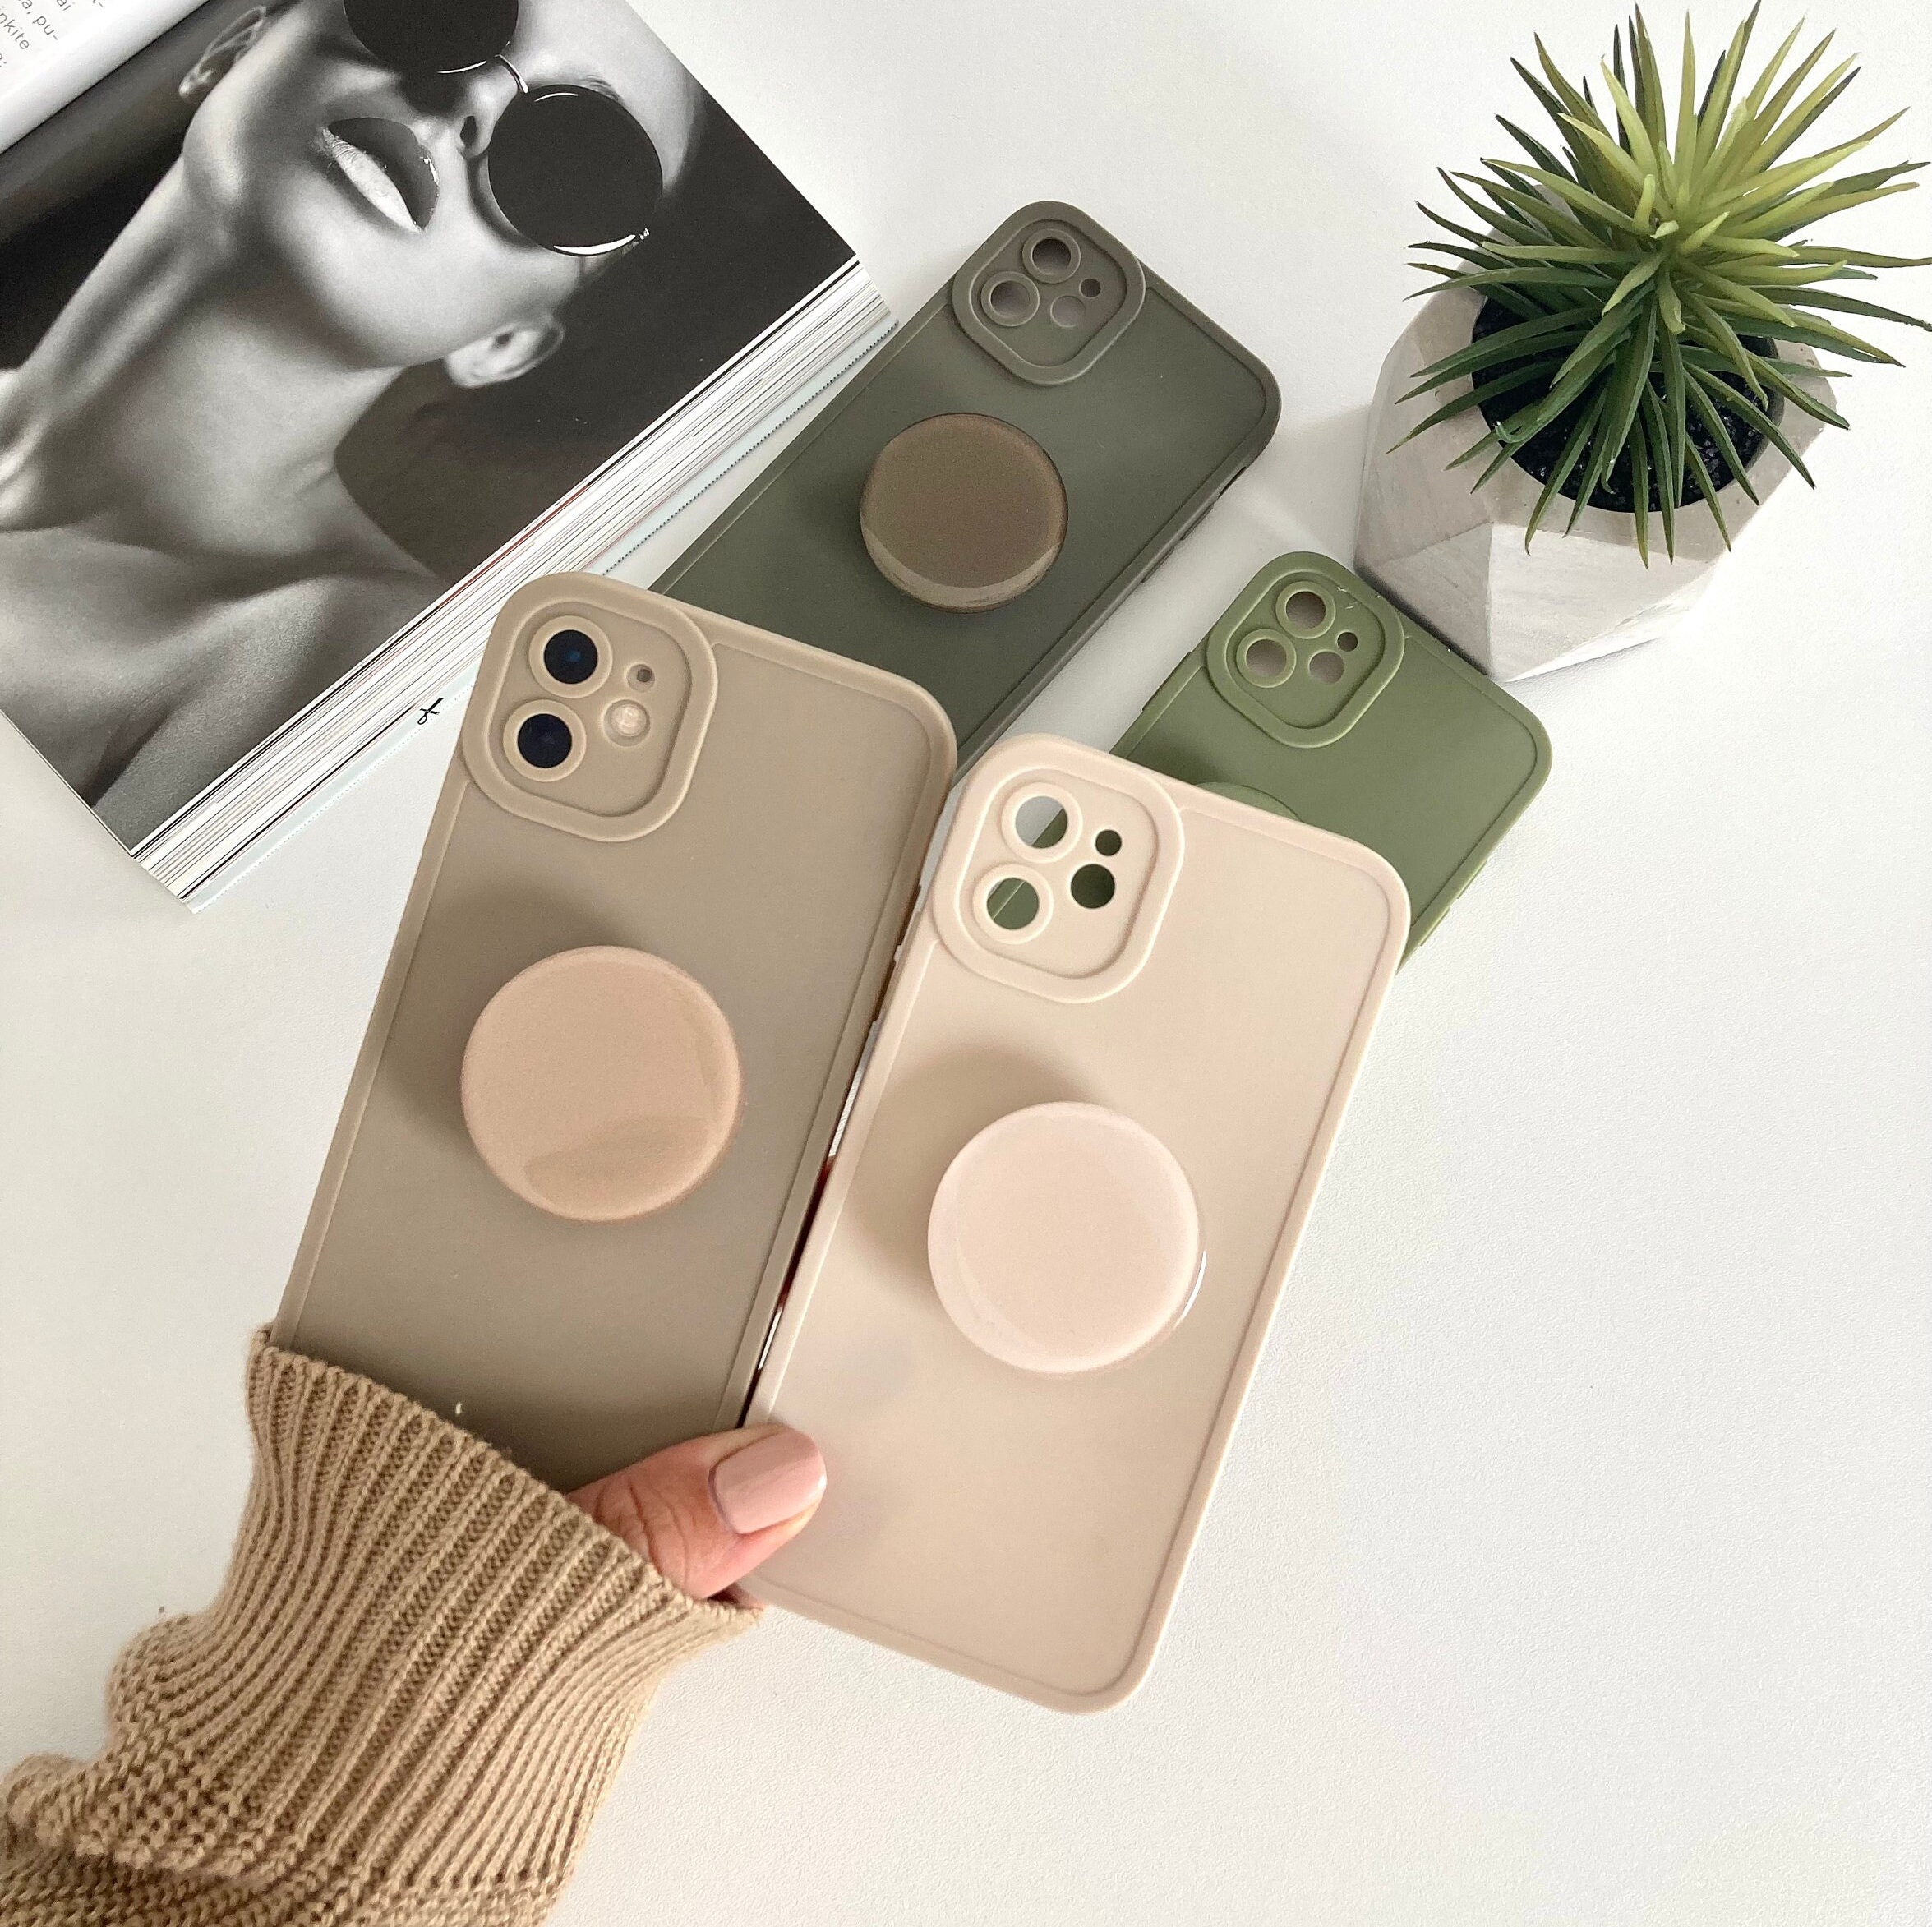 Silicone Pop Socket iPhone 13 Case - Caseface